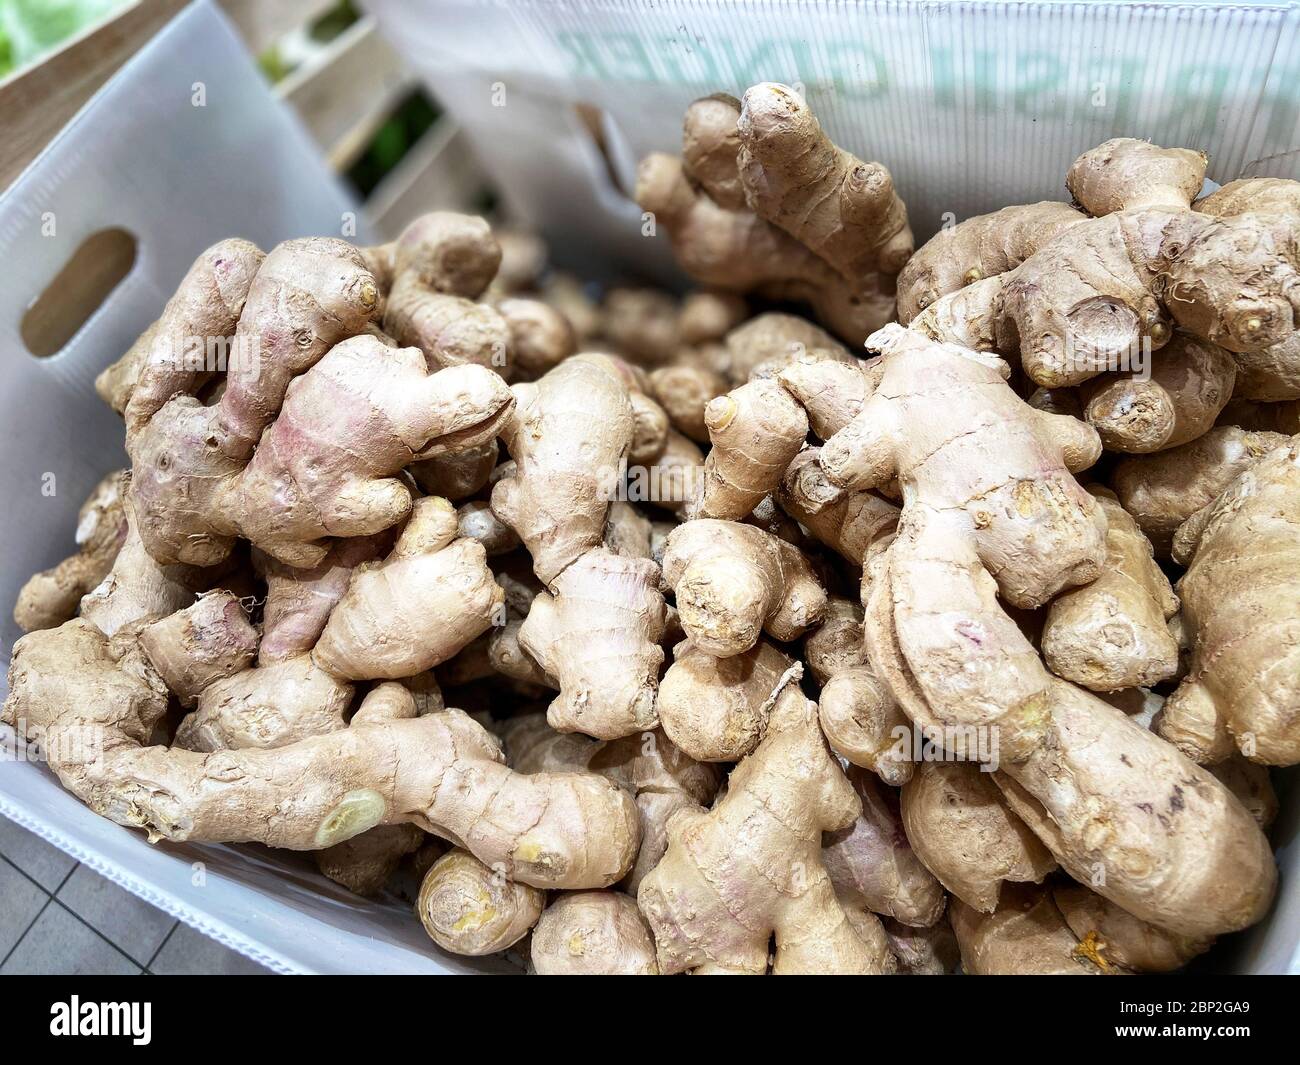 Mobile photo. Ginger root in the tray. Supermarket. Stock Photo